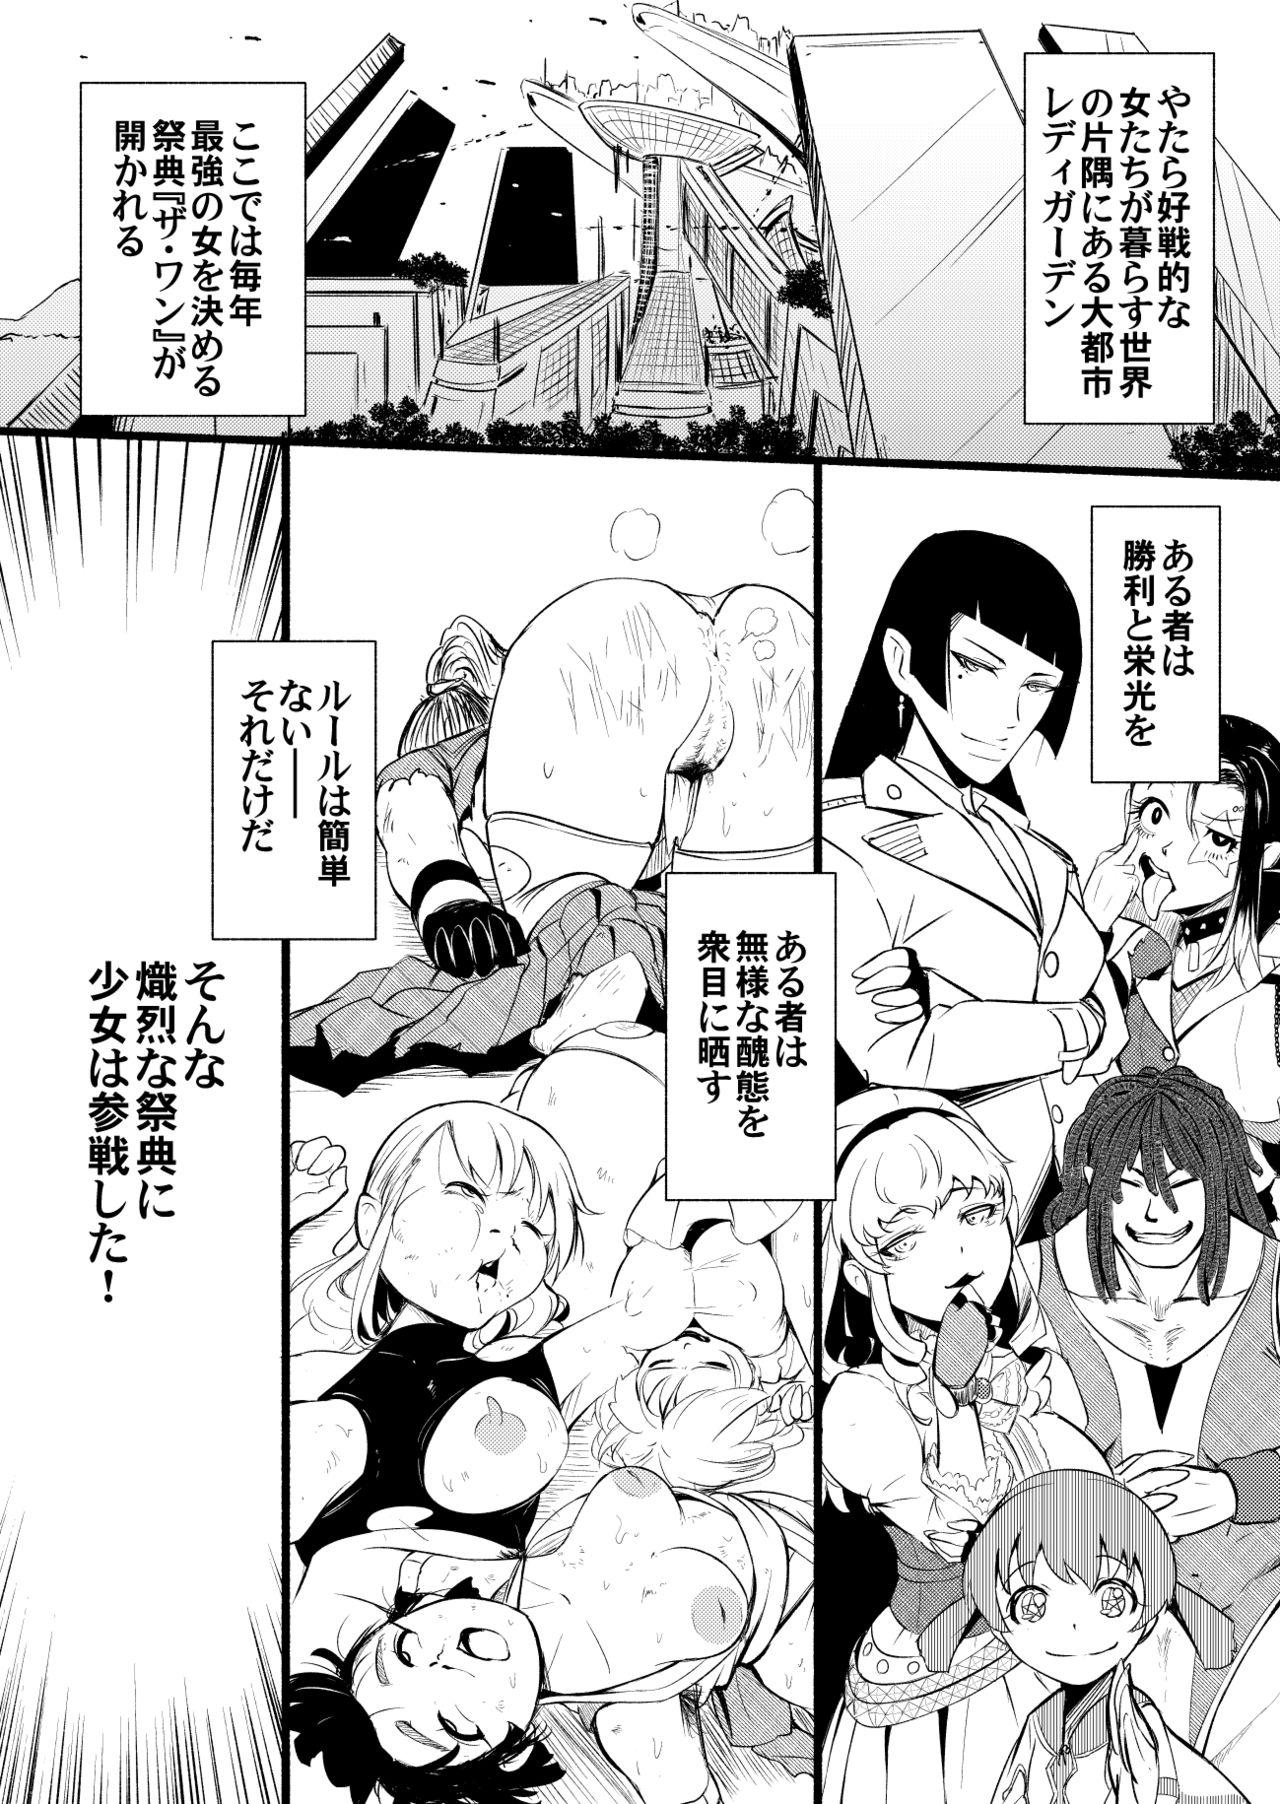 Role Play Girls Musou Step Mom - Page 2